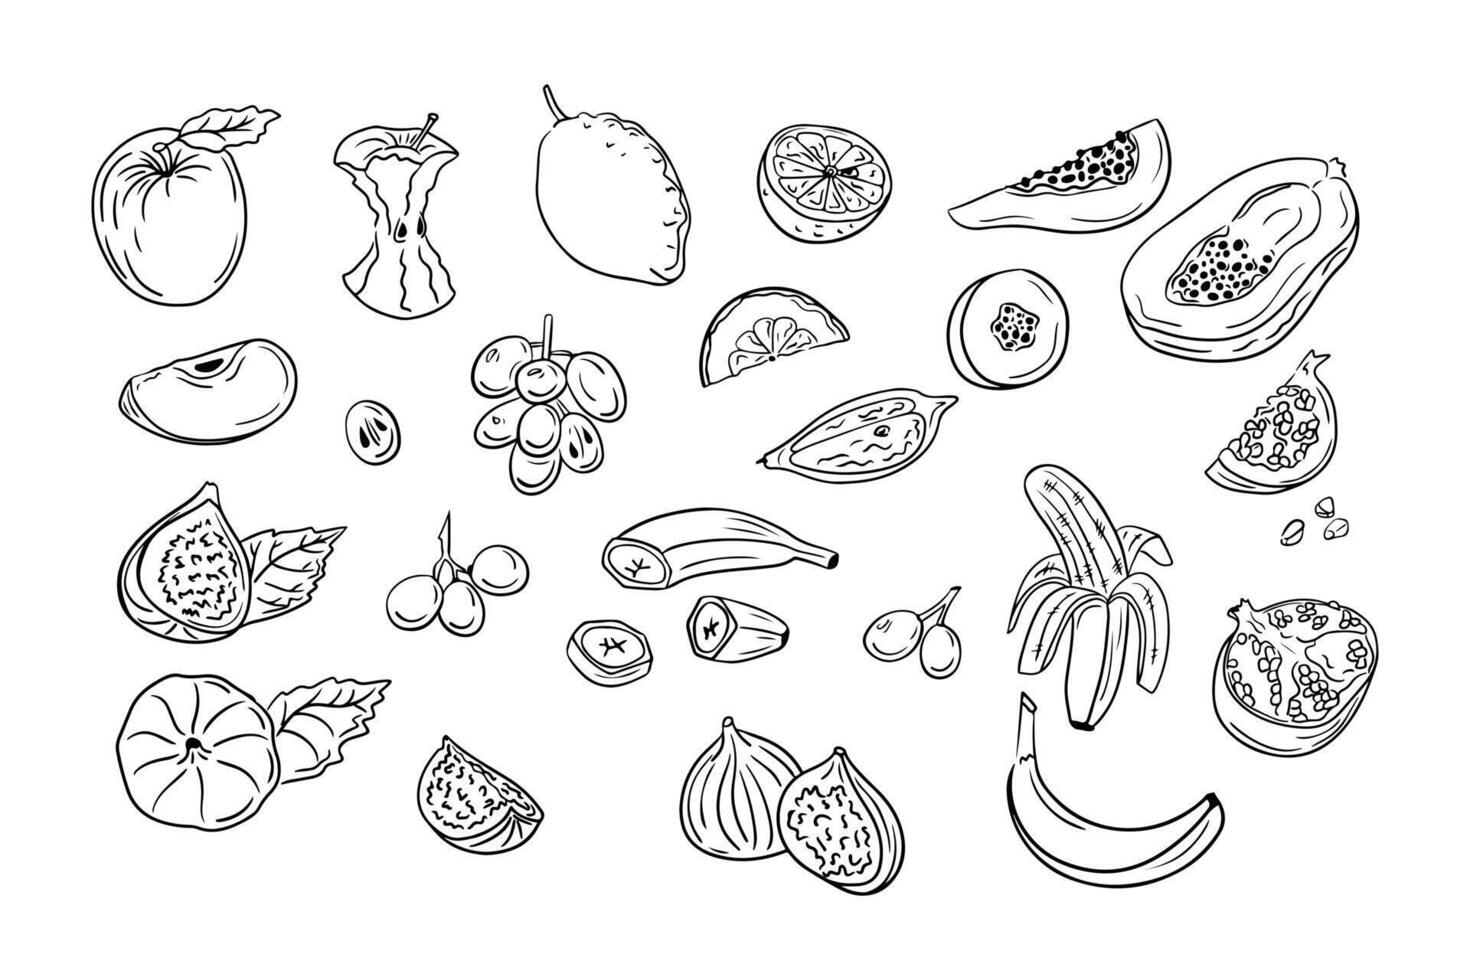 Hand drawn sketchy outline set of juicy fruits. Doodle black contour whole fruits and slices on white background. Ideal for coloring pages, tattoo, pattern vector